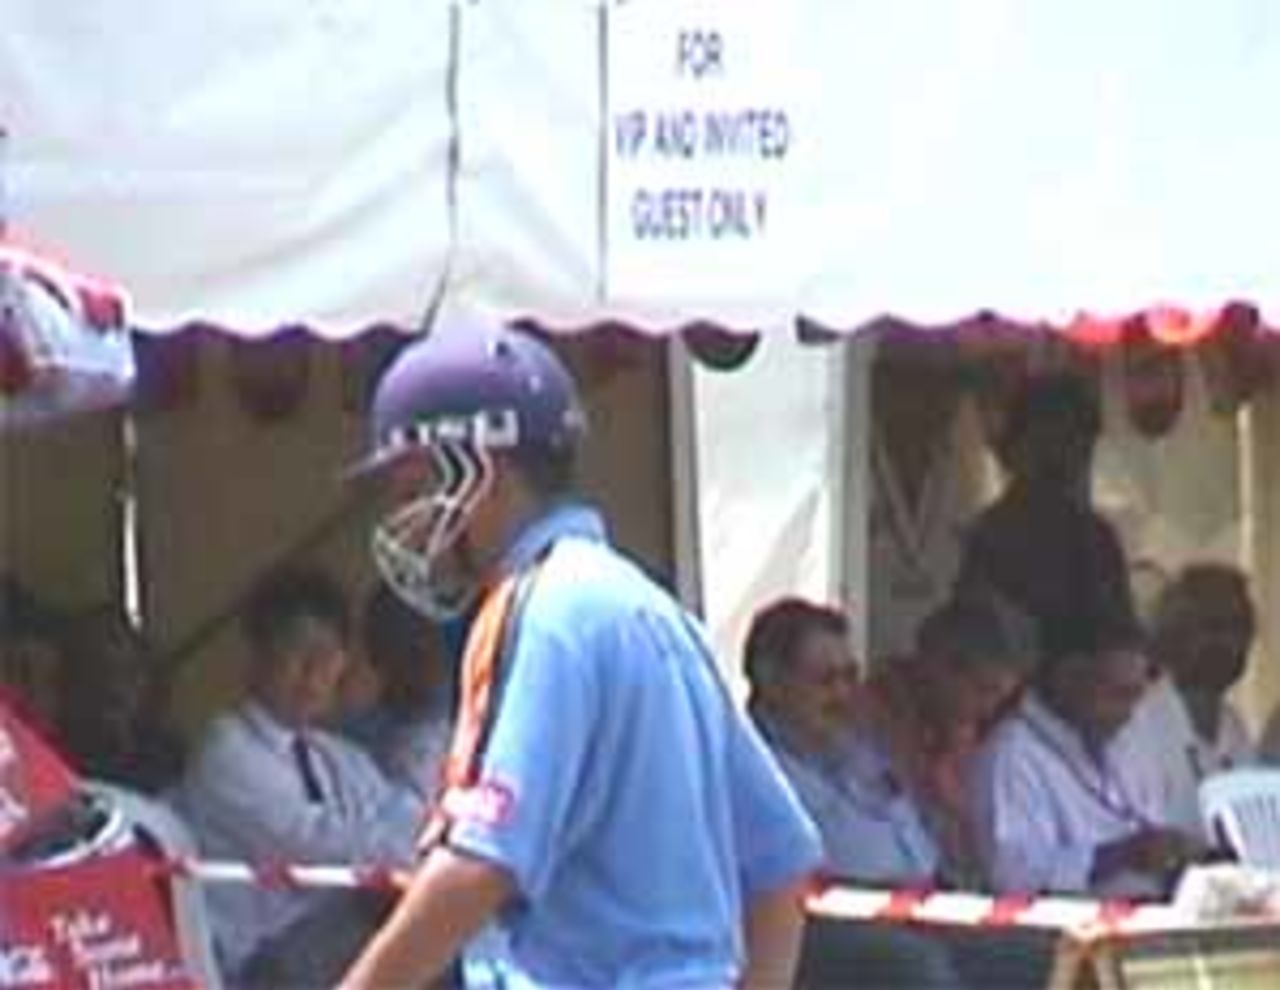 India's hopes fade as Tendulkar walks back to the pavillion after being dismissed by Walsh, India v West Indies (Final), Coca-Cola Singapore Challenge, 1999-2000, Kallang Ground, Singapore, 7 Sep 1999.